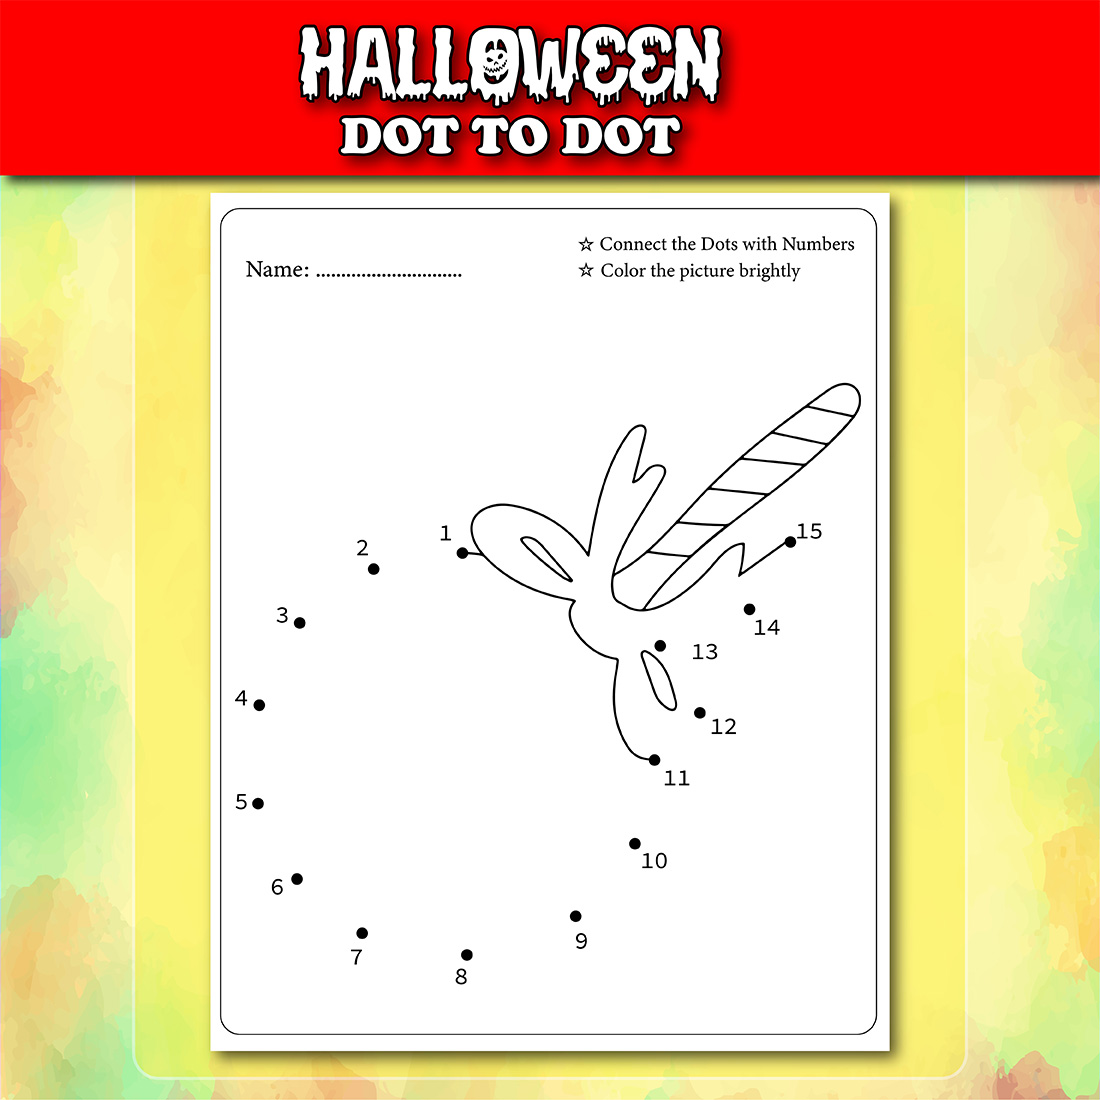 Halloween Dot To Dot For Kids Vol - 3, example of page.